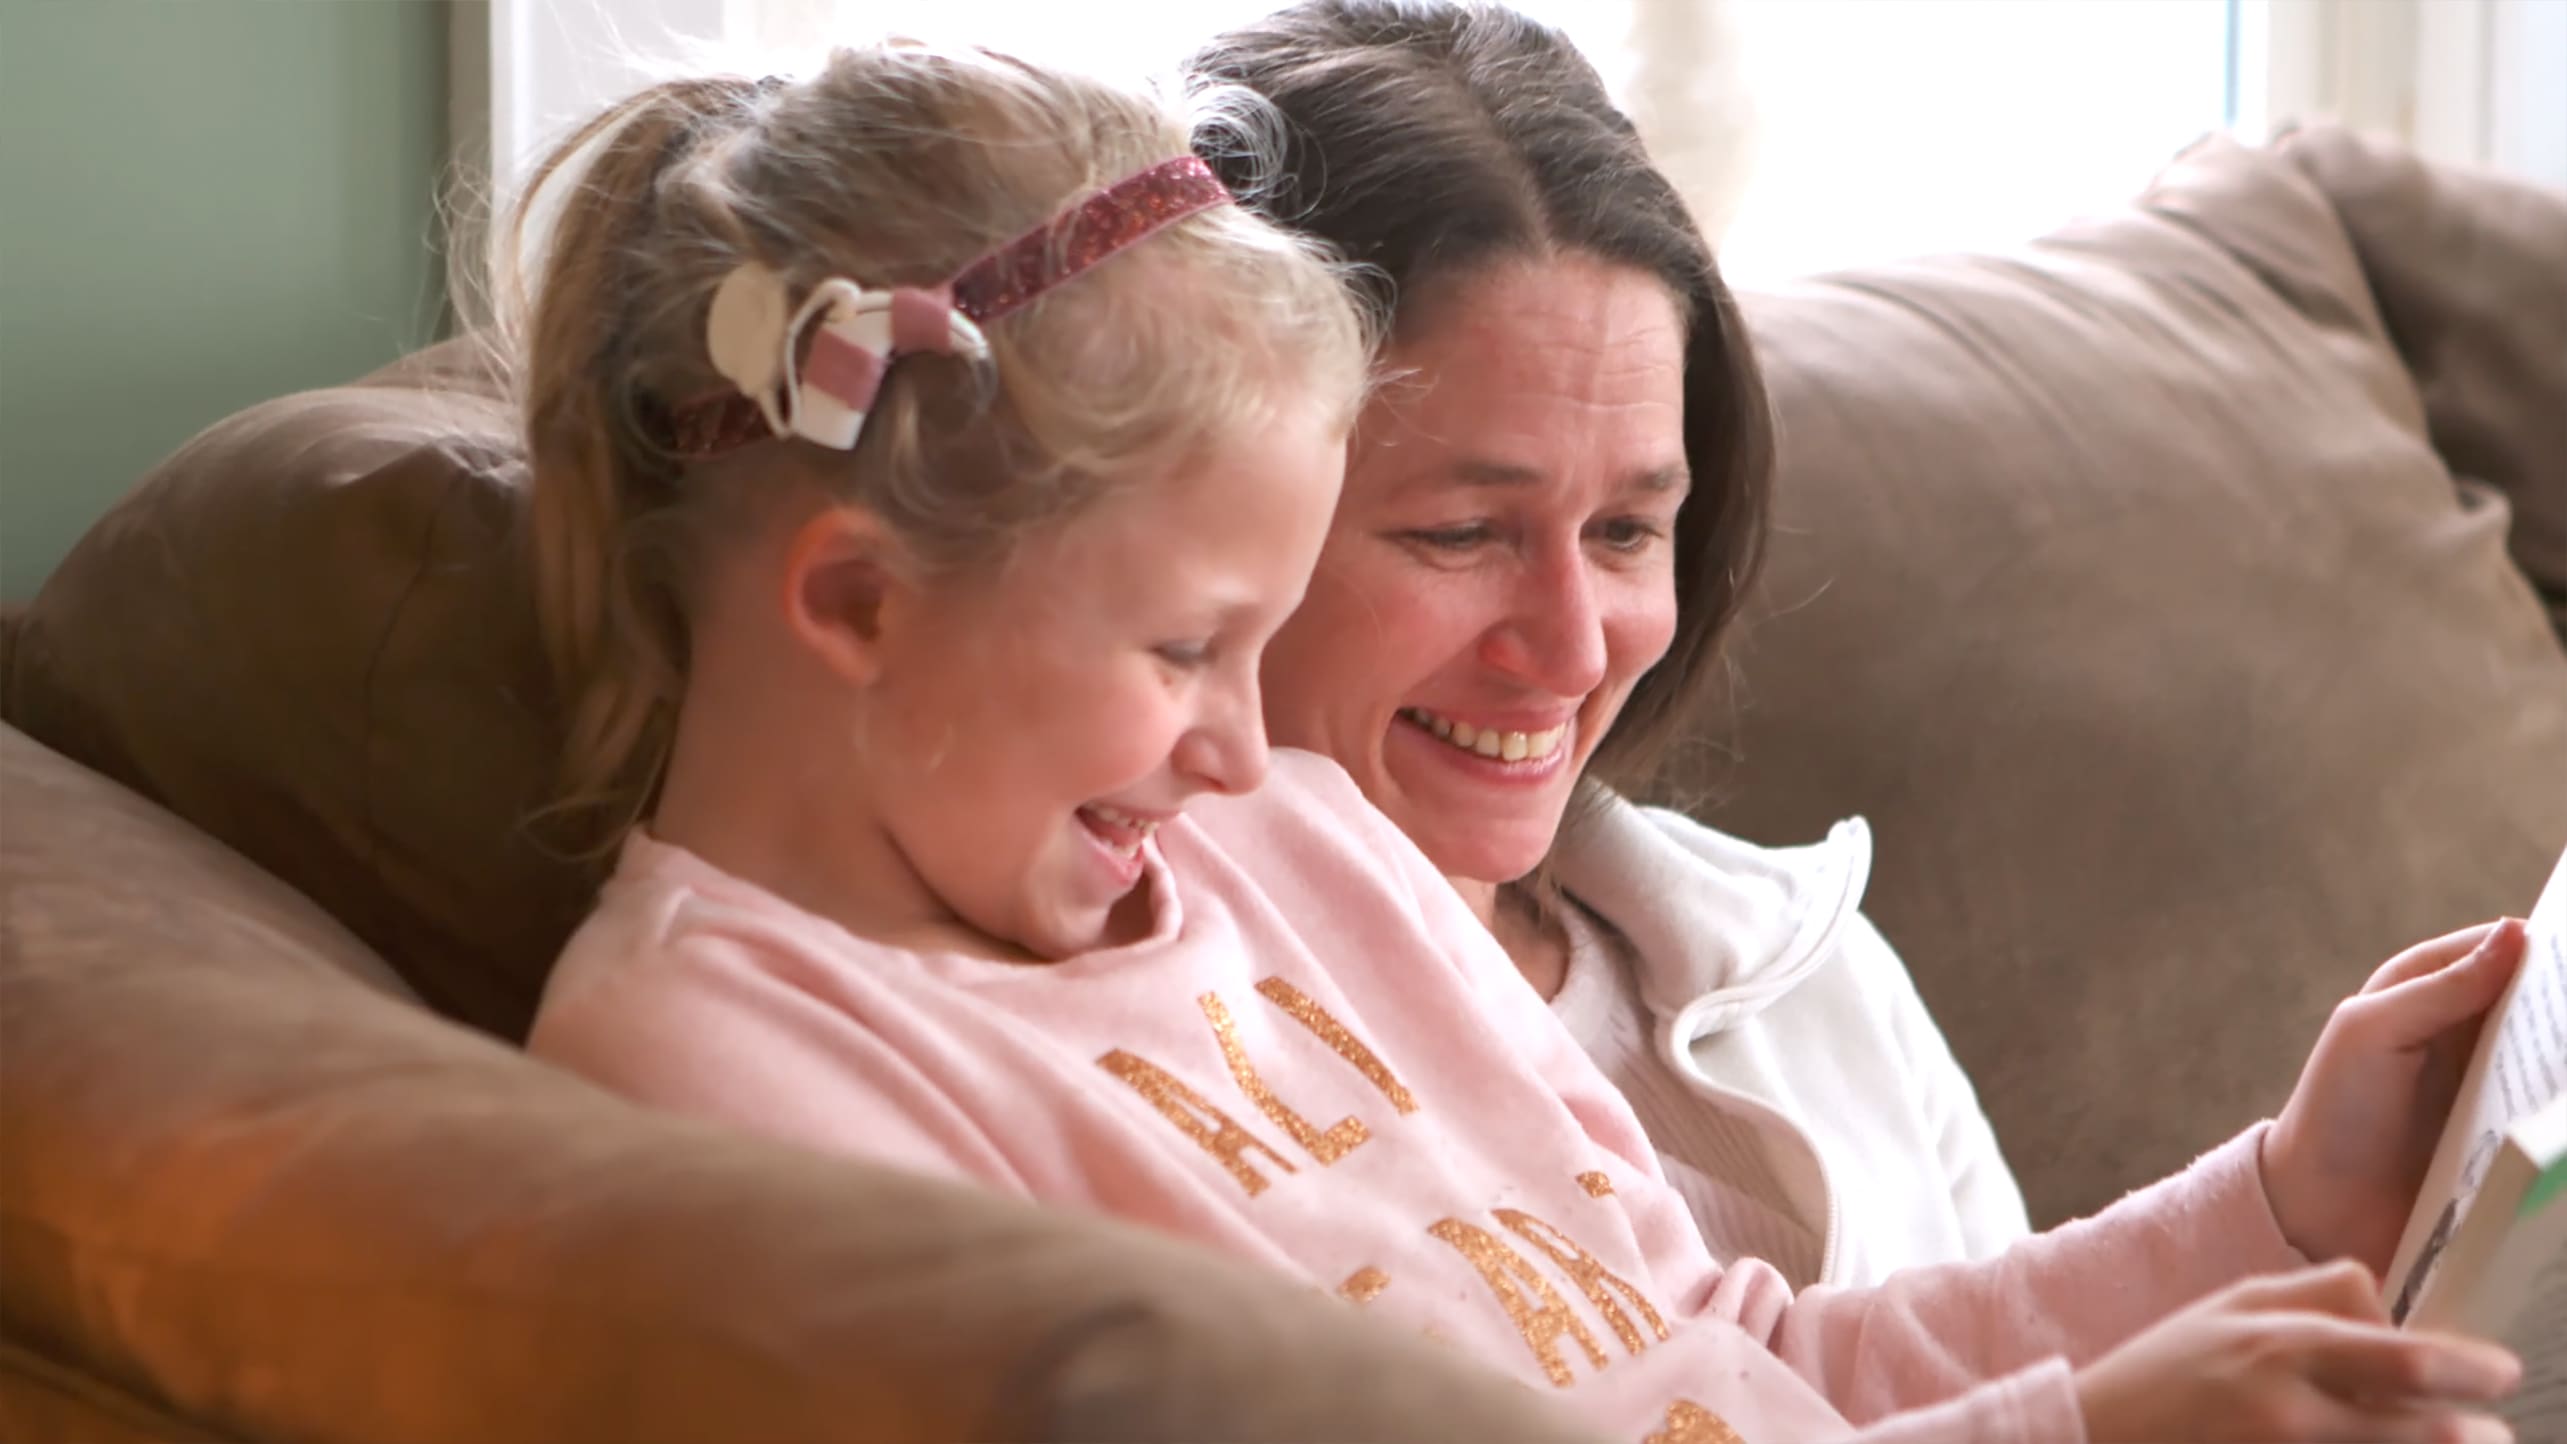 A little girl with a cochlear implant reads with her mother.